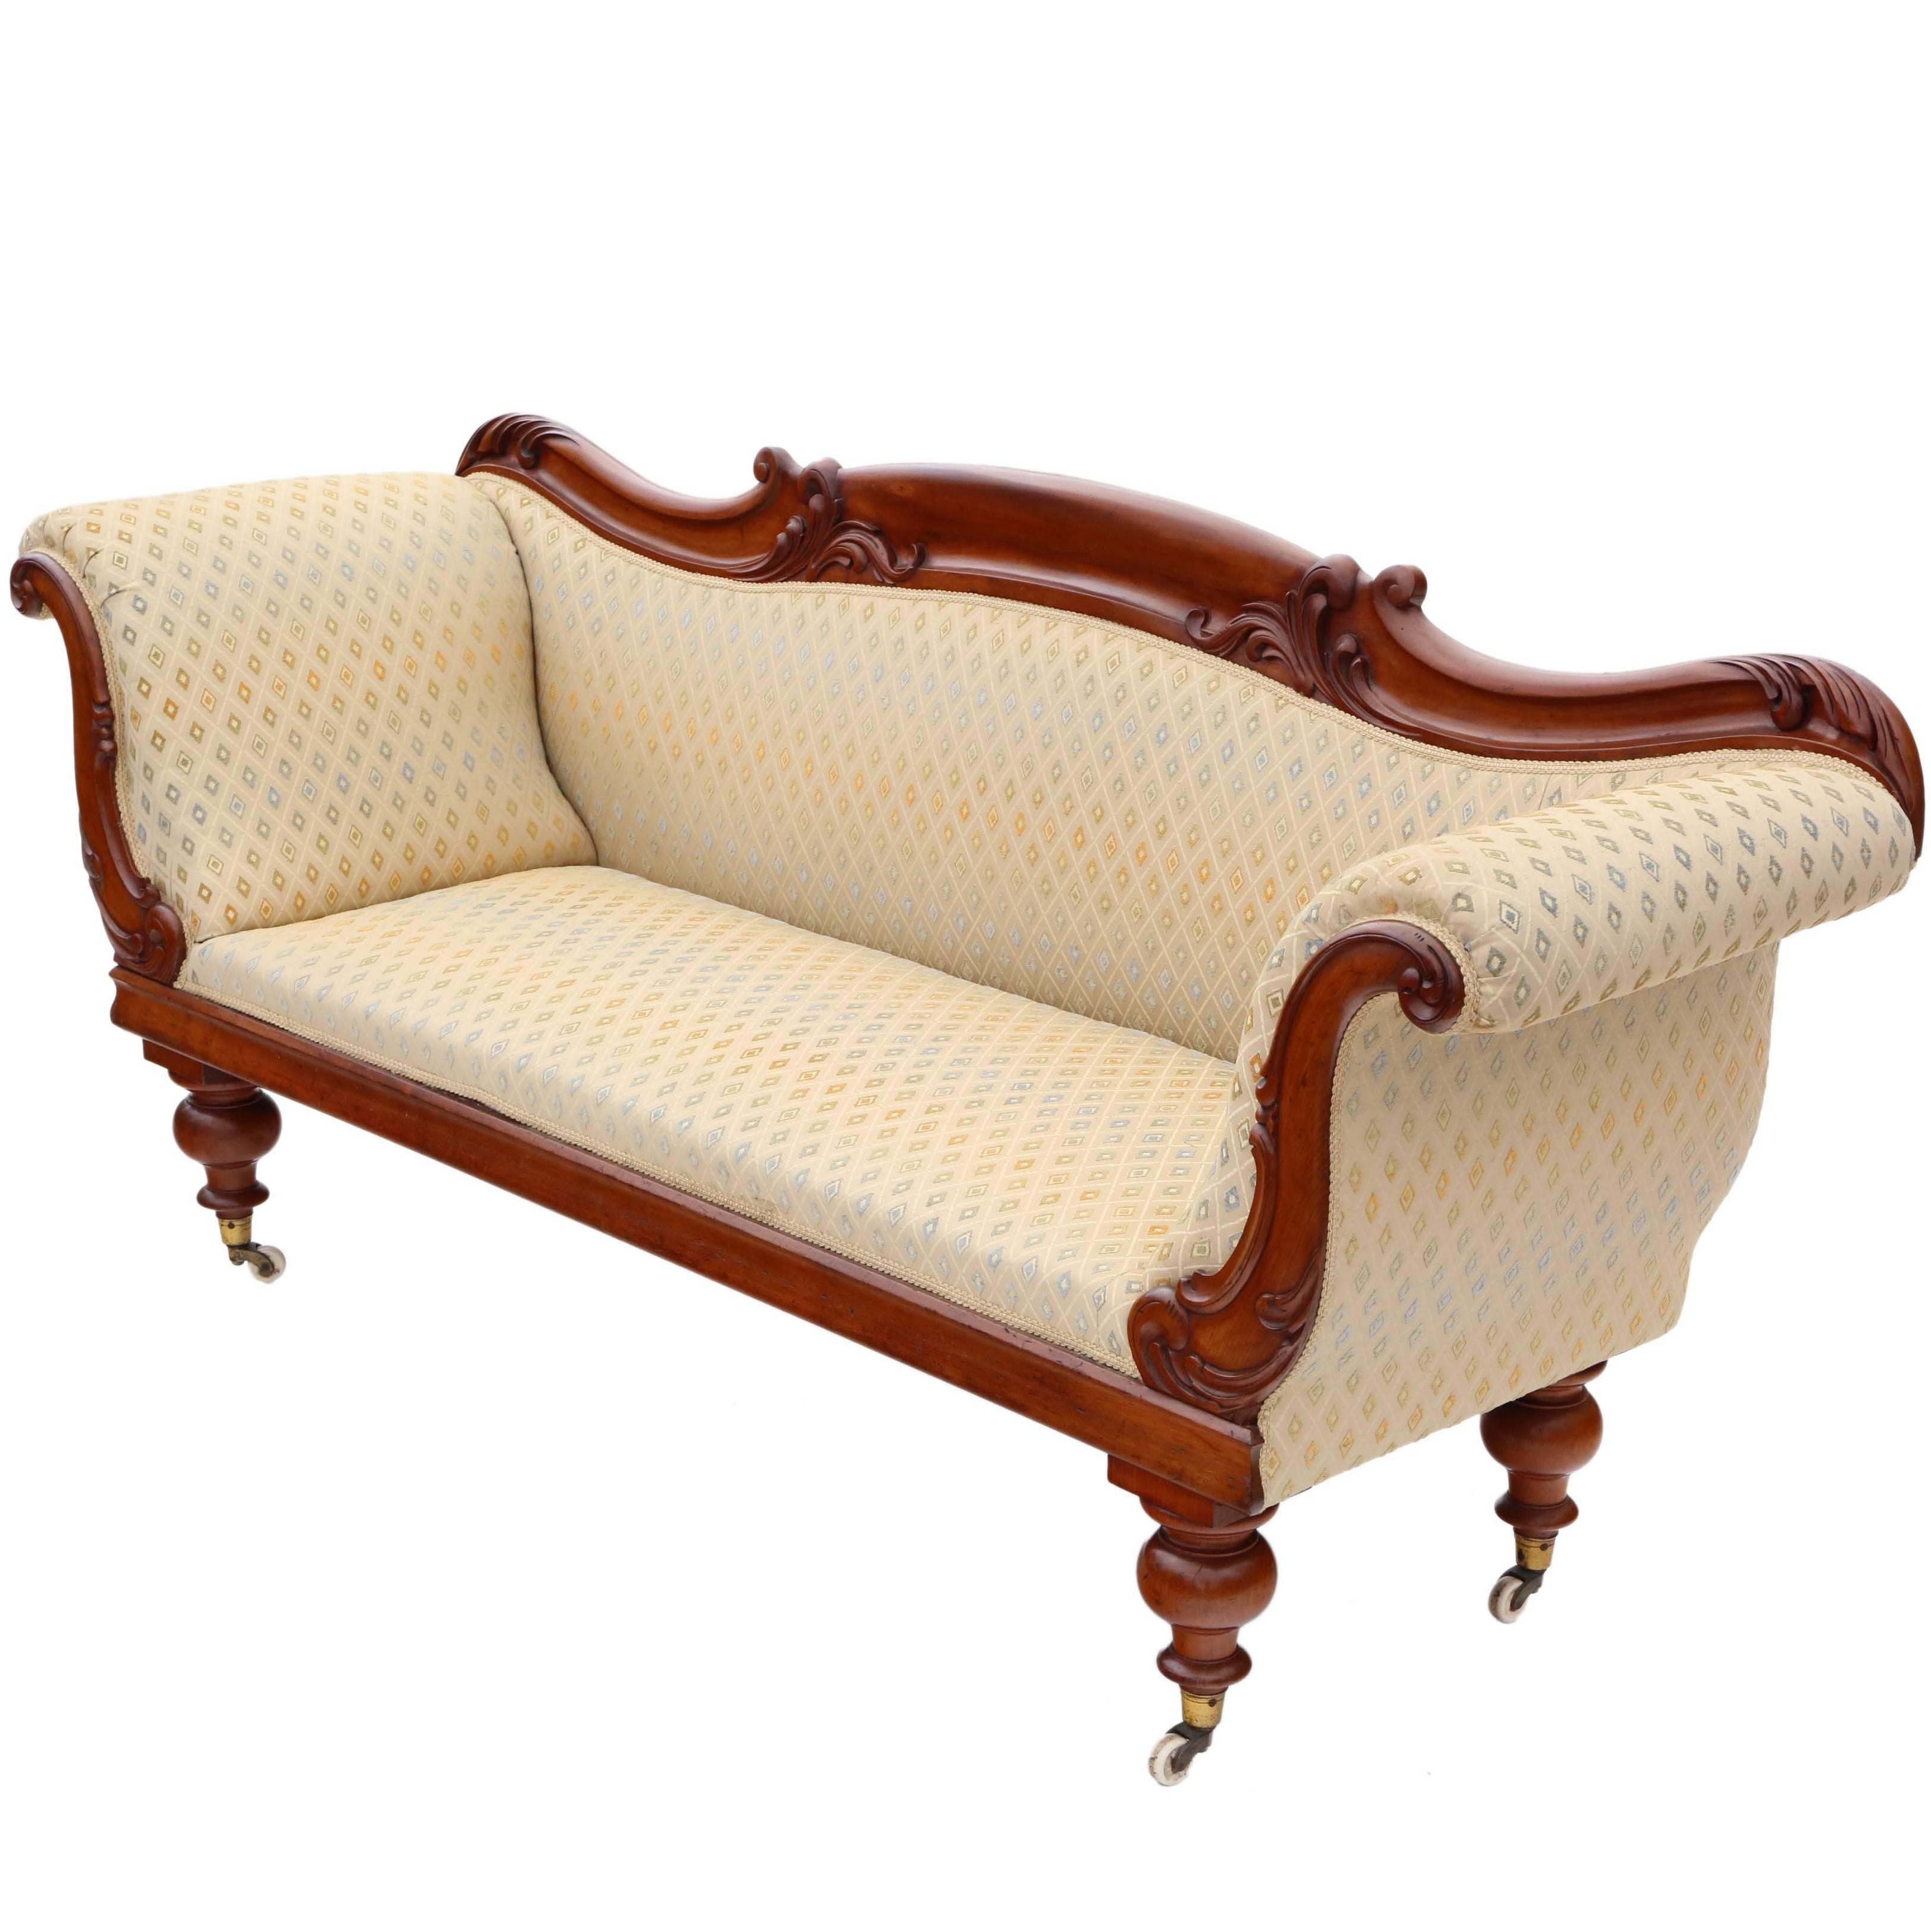 Antique Quality Victorian/William iv Mahogany Scroll Arm Sofa Chaise Longue For Sale